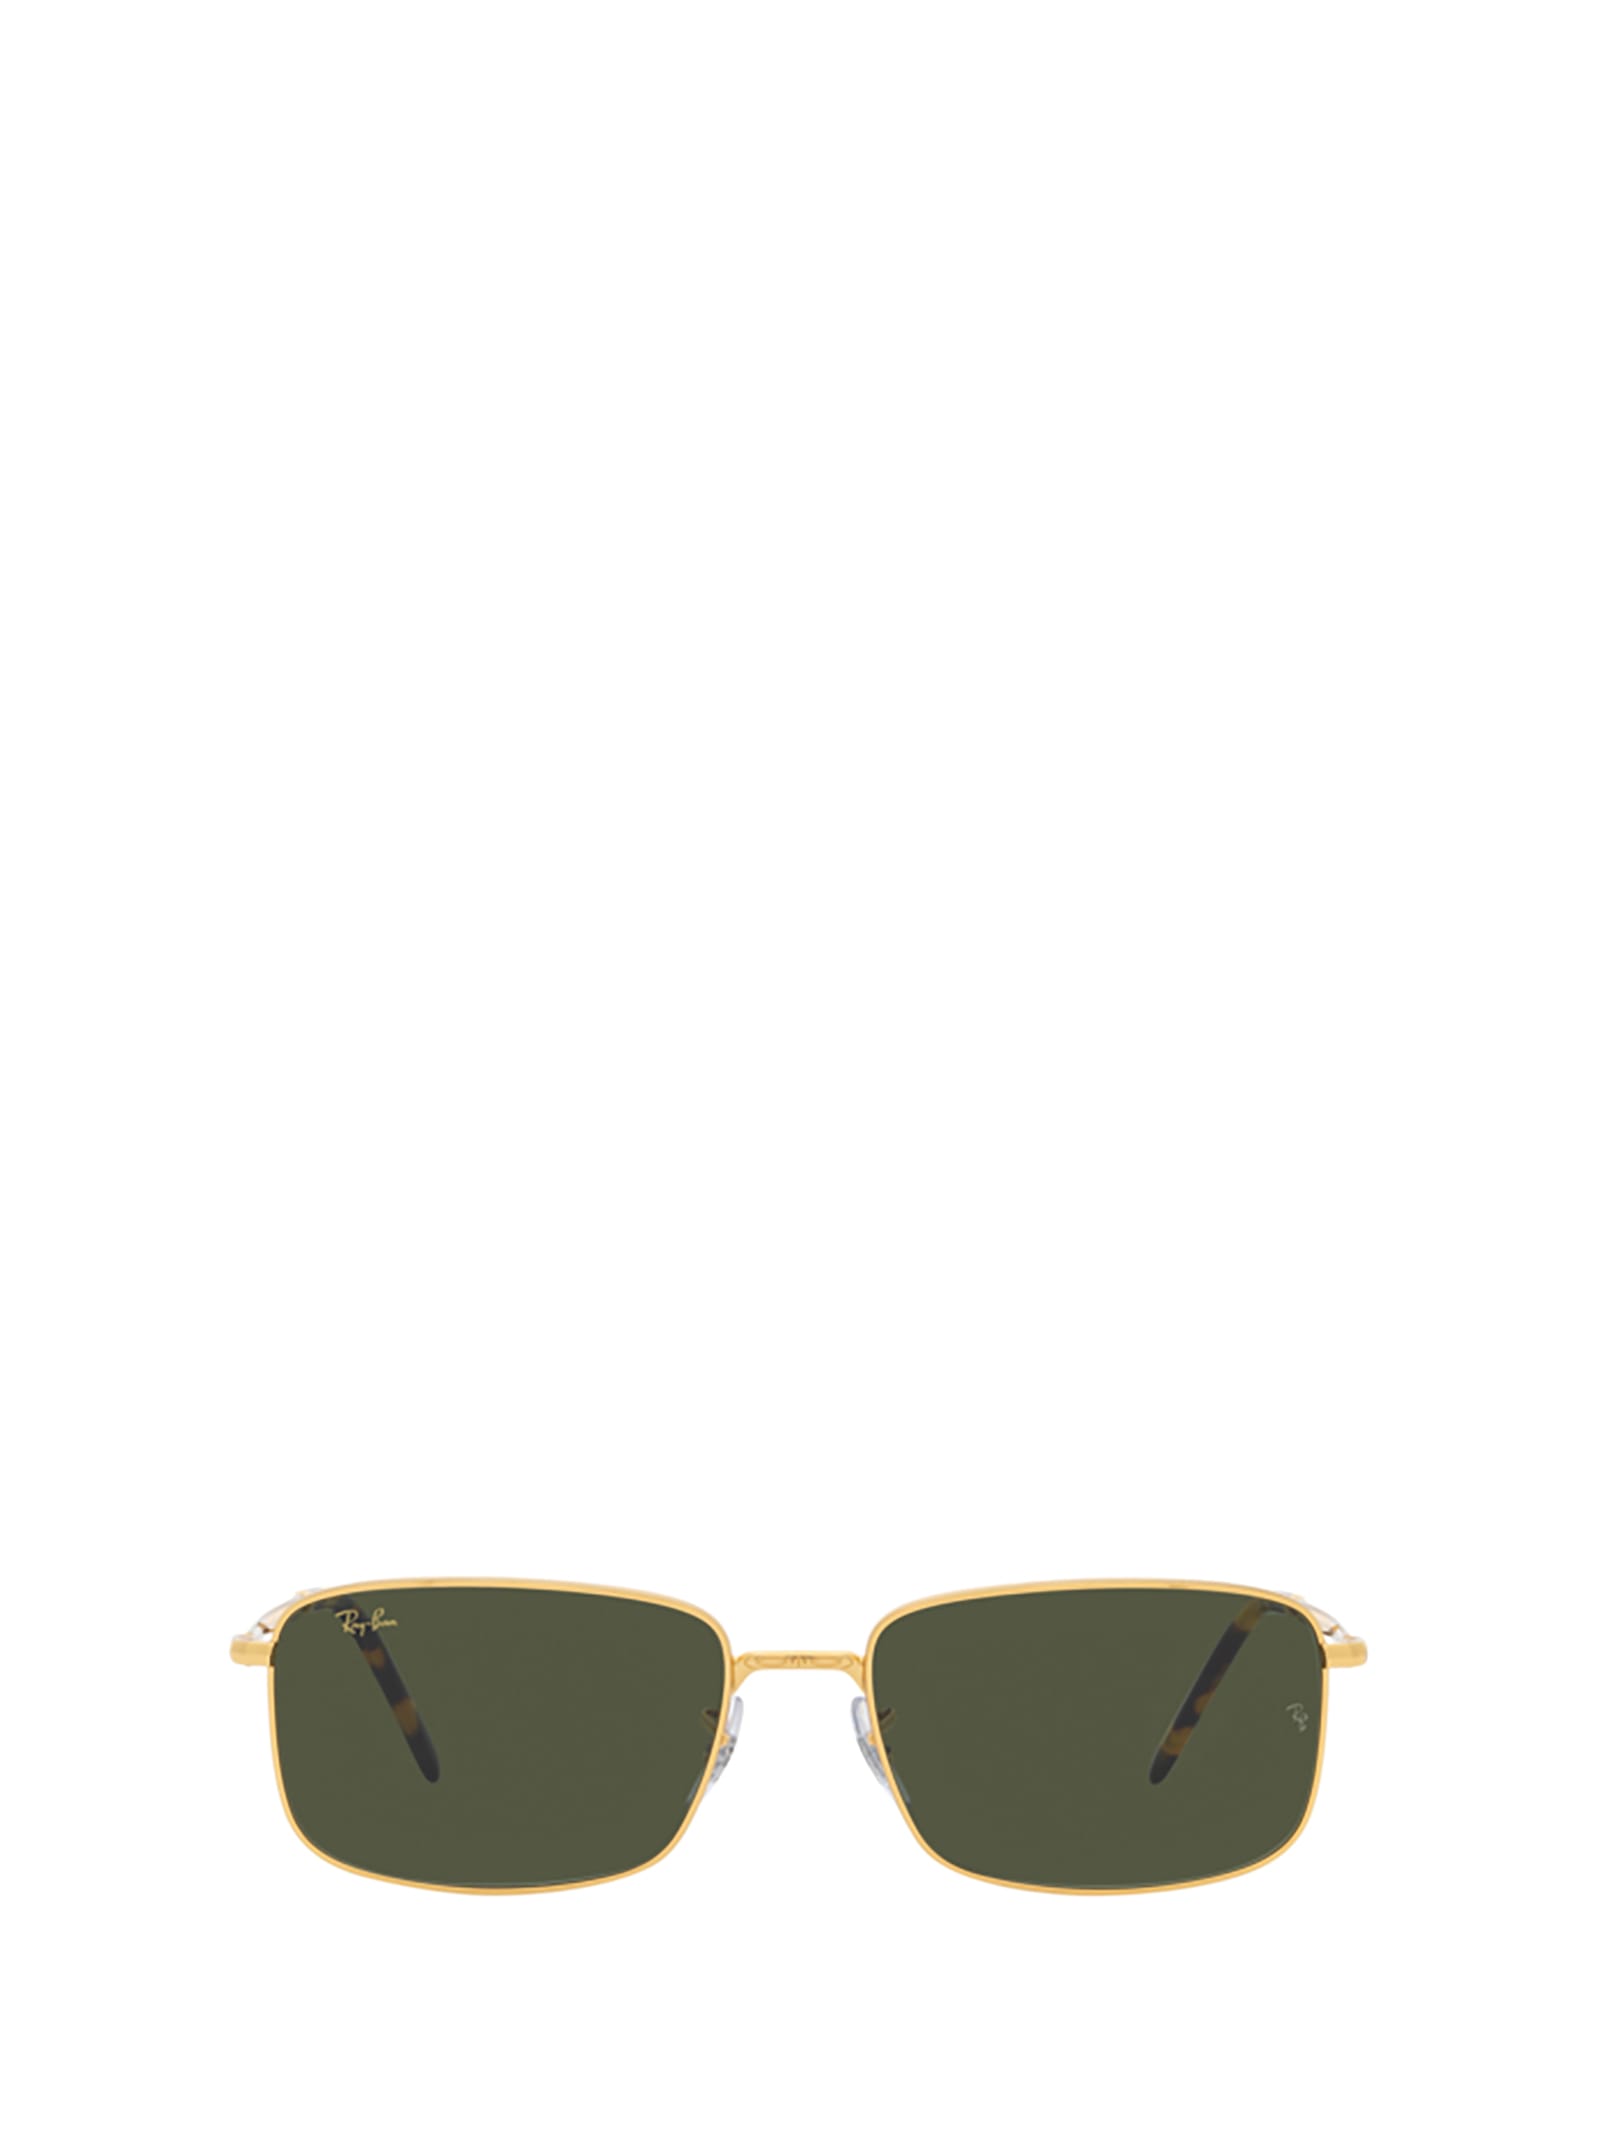 RAY BAN RB3717 GOLD SUNGLASSES